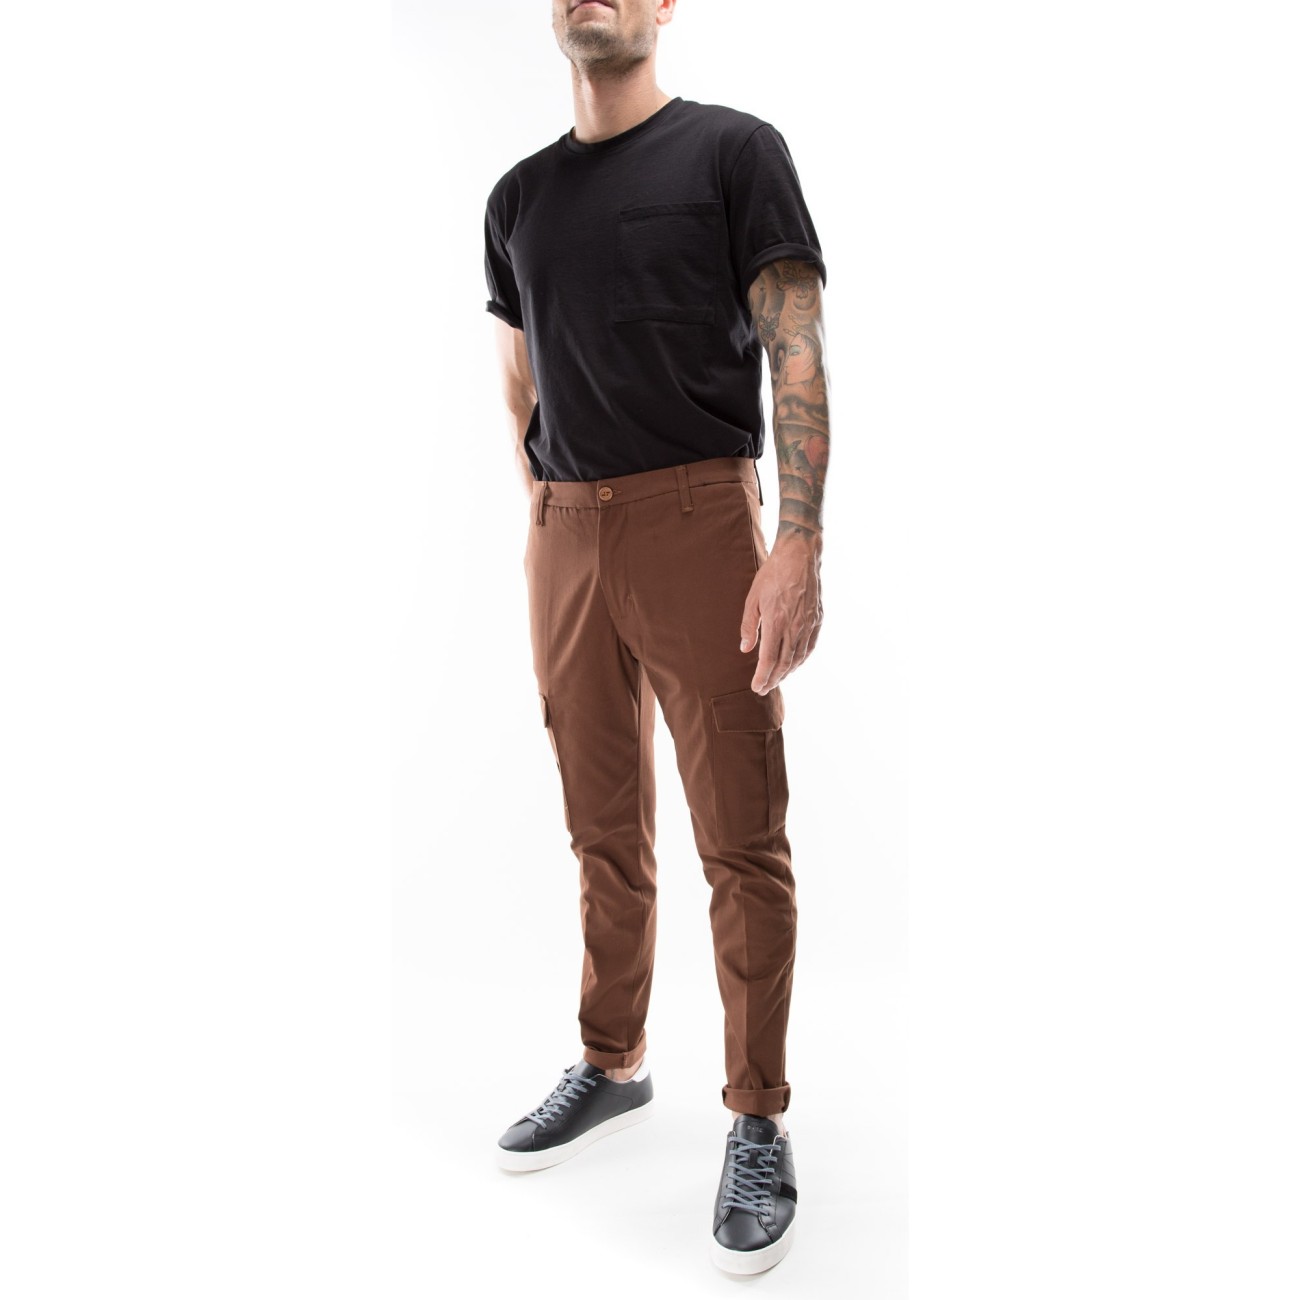 Dark Brown Cargo Pants with Crew-neck T-shirt Outfits (54 ideas & outfits)